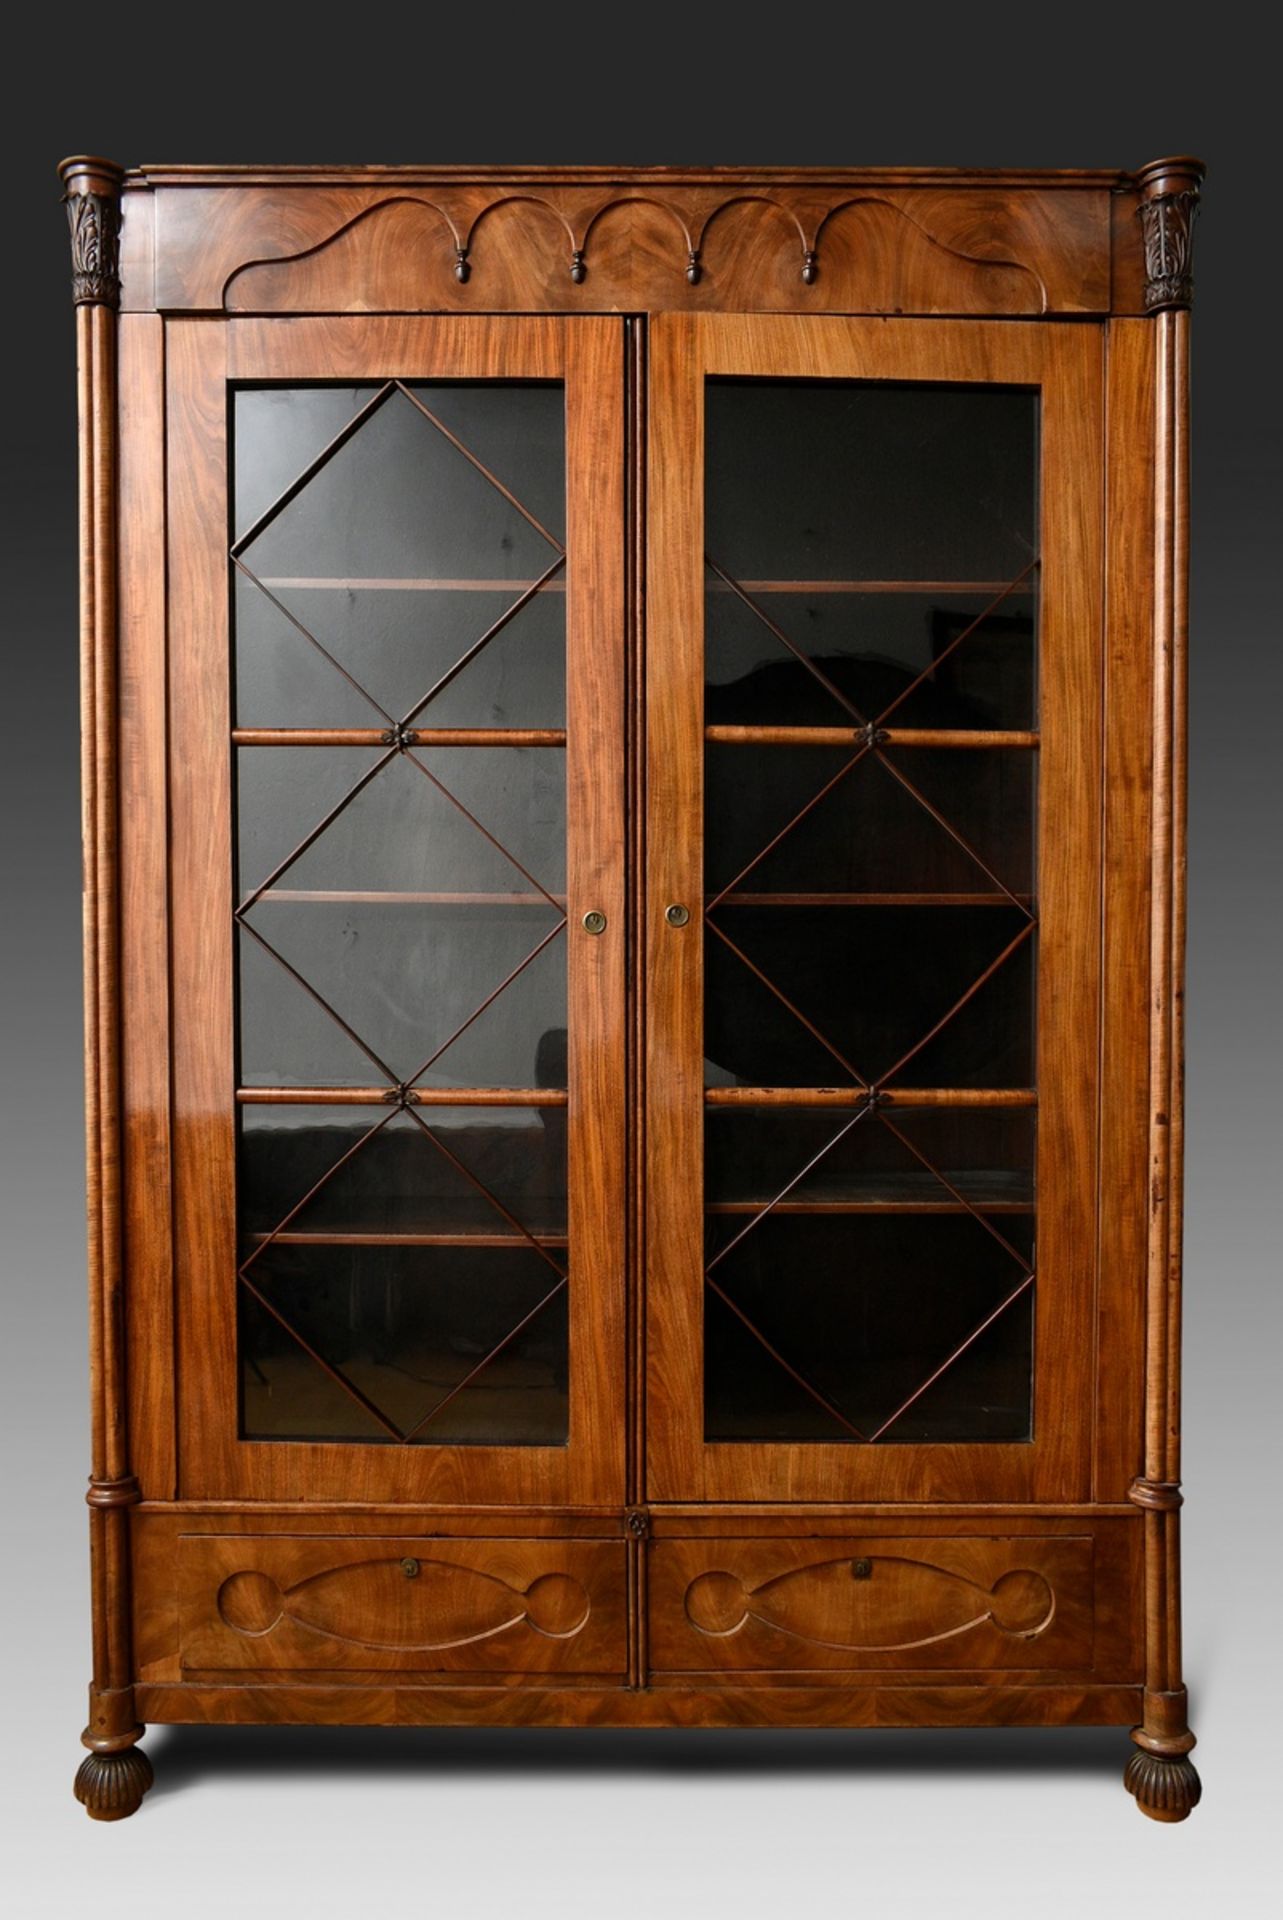 Biedermeier bookcase with gothic arches in the cornice and diamond bracing on the glazed doors betw - Image 2 of 16